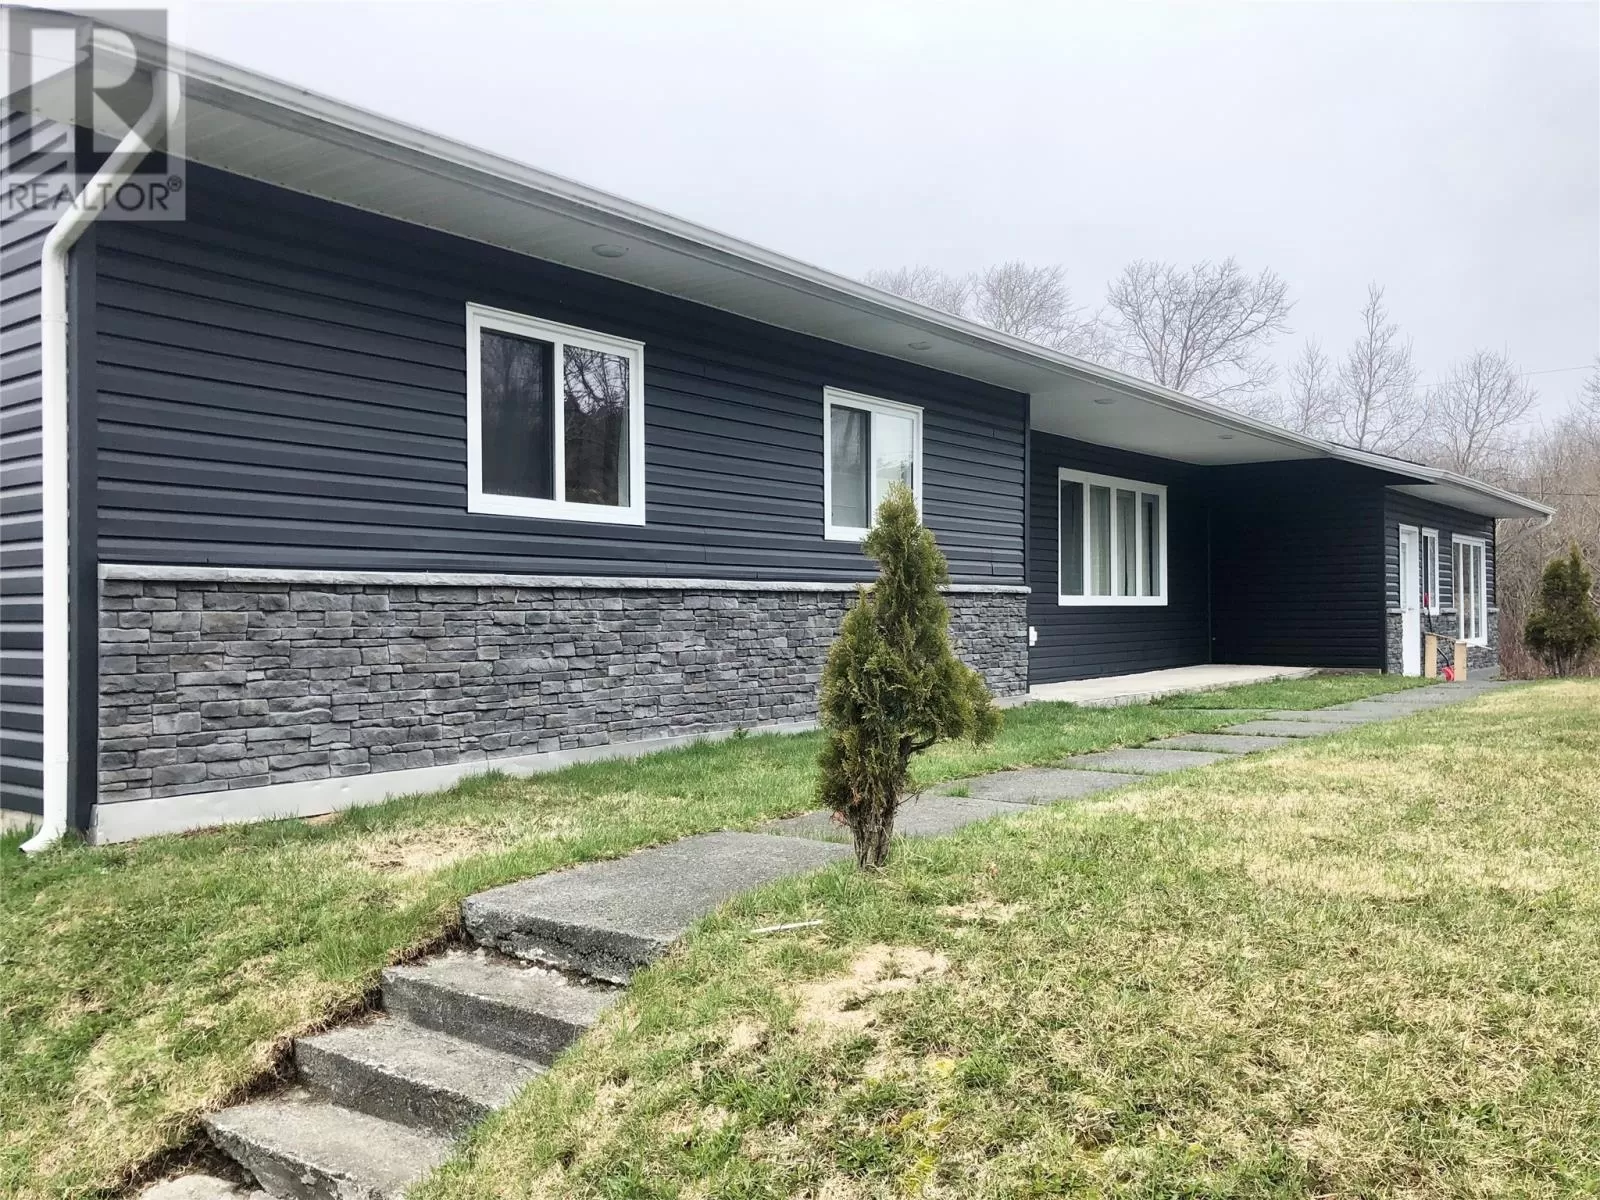 Multi-Family for rent: 98 Shearstown Road, Bay Roberts, Newfoundland & Labrador A0A 3V0